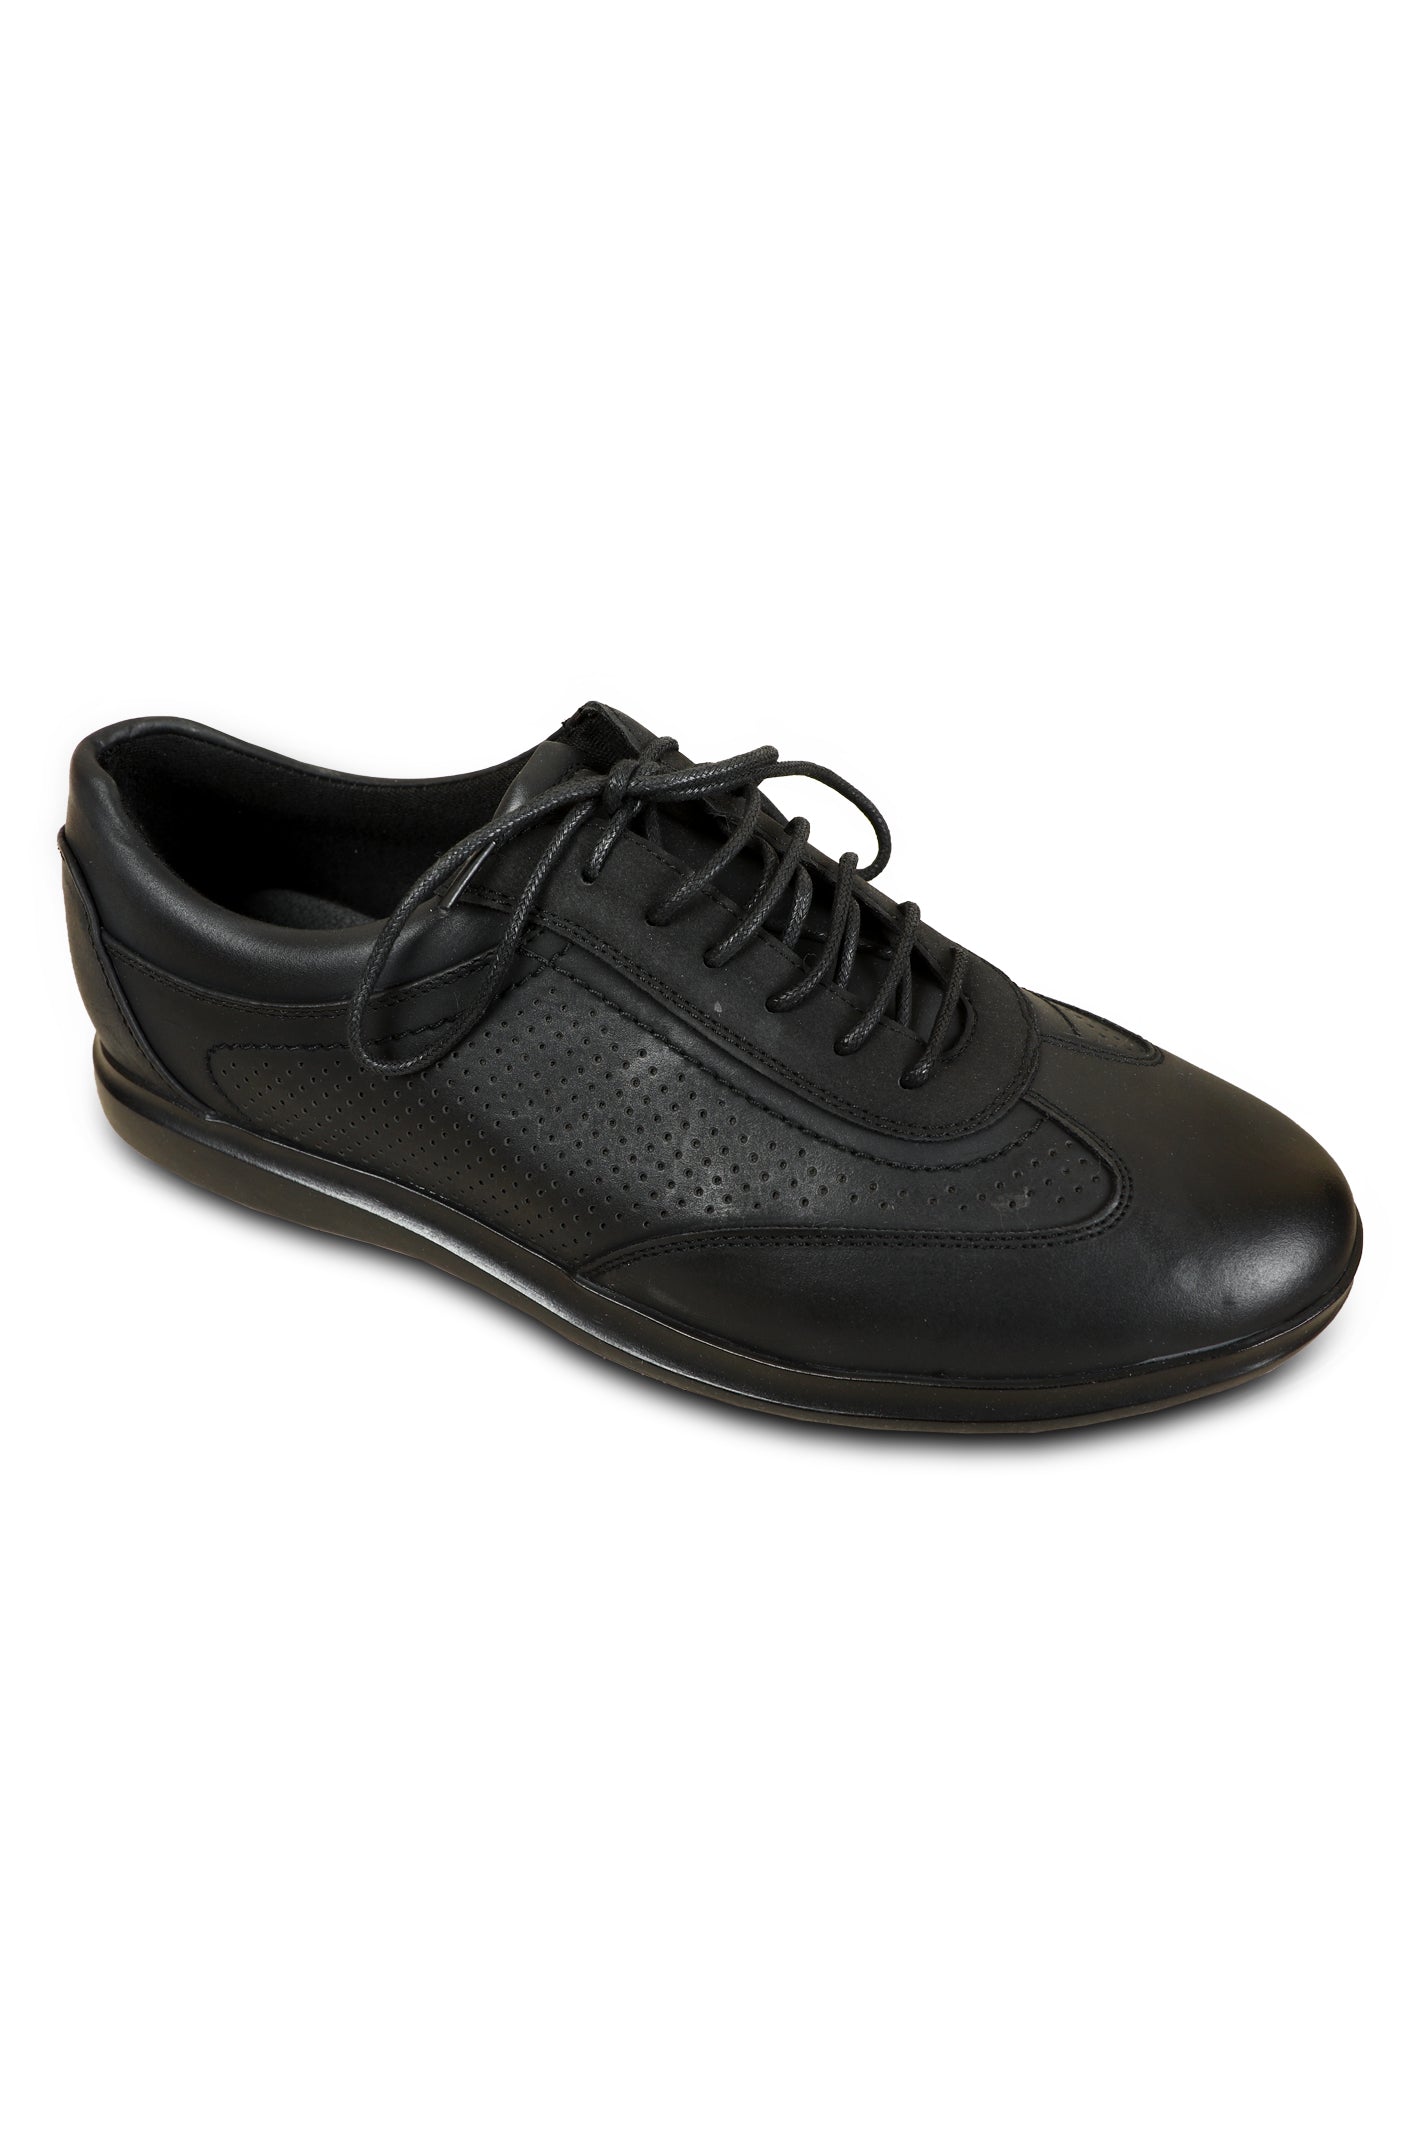 Casual Shoes For Men in Black SKU: SMJ0009-BLACK - Diners